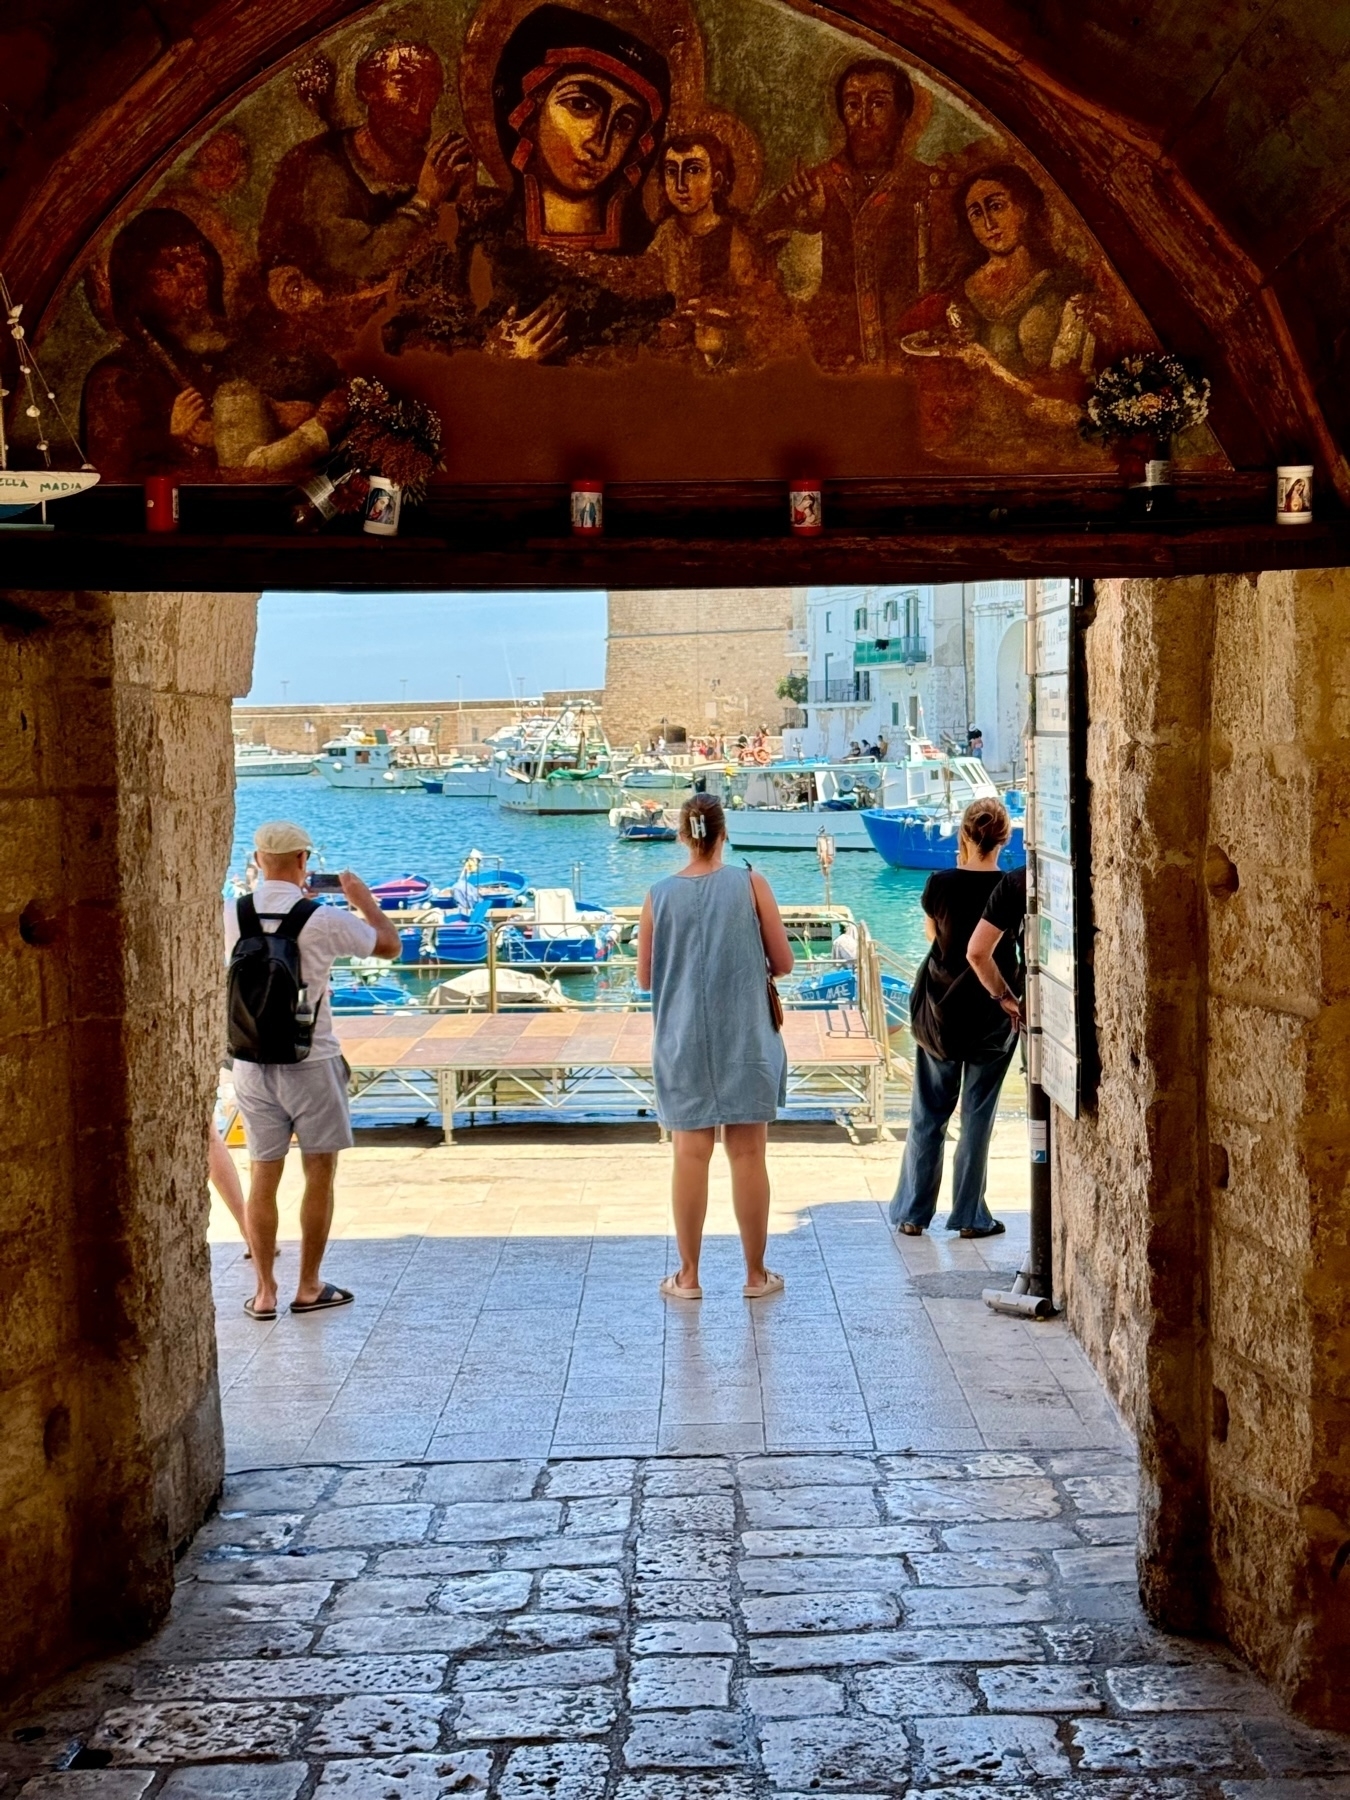 View from a stone archway showing three people looking out at a harbor with boats. Above the arch, there is a mural depicting religious figures. The scene is lively with blue water and boats in the background.